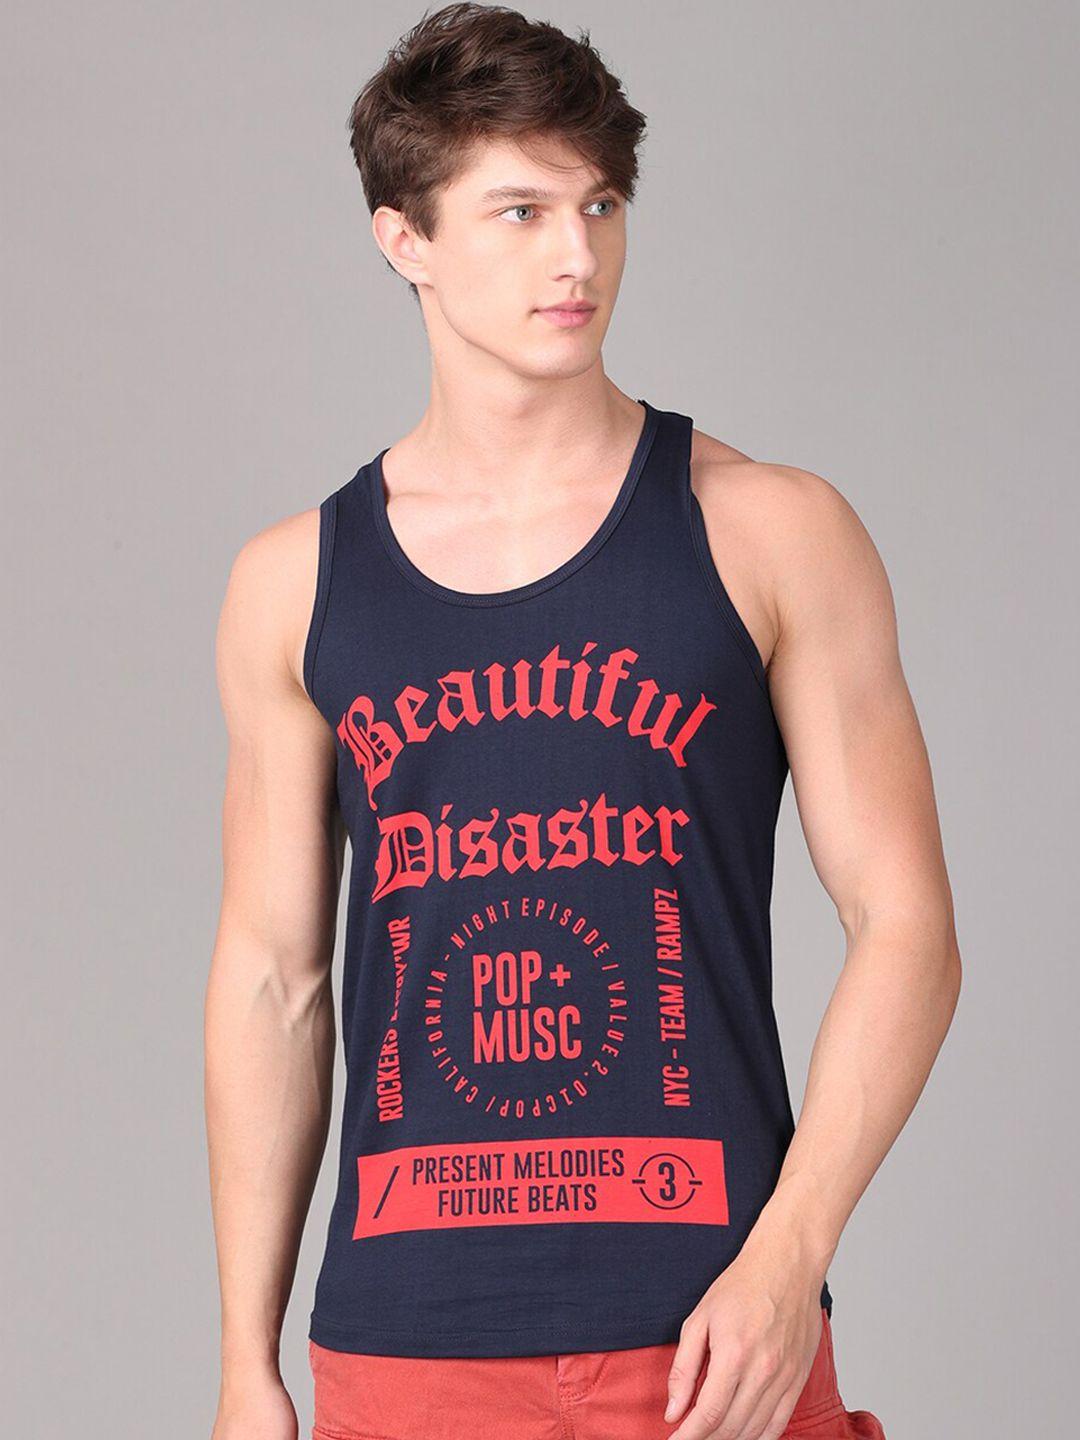 imyoung men navy blue & red typography printed innerwear vests